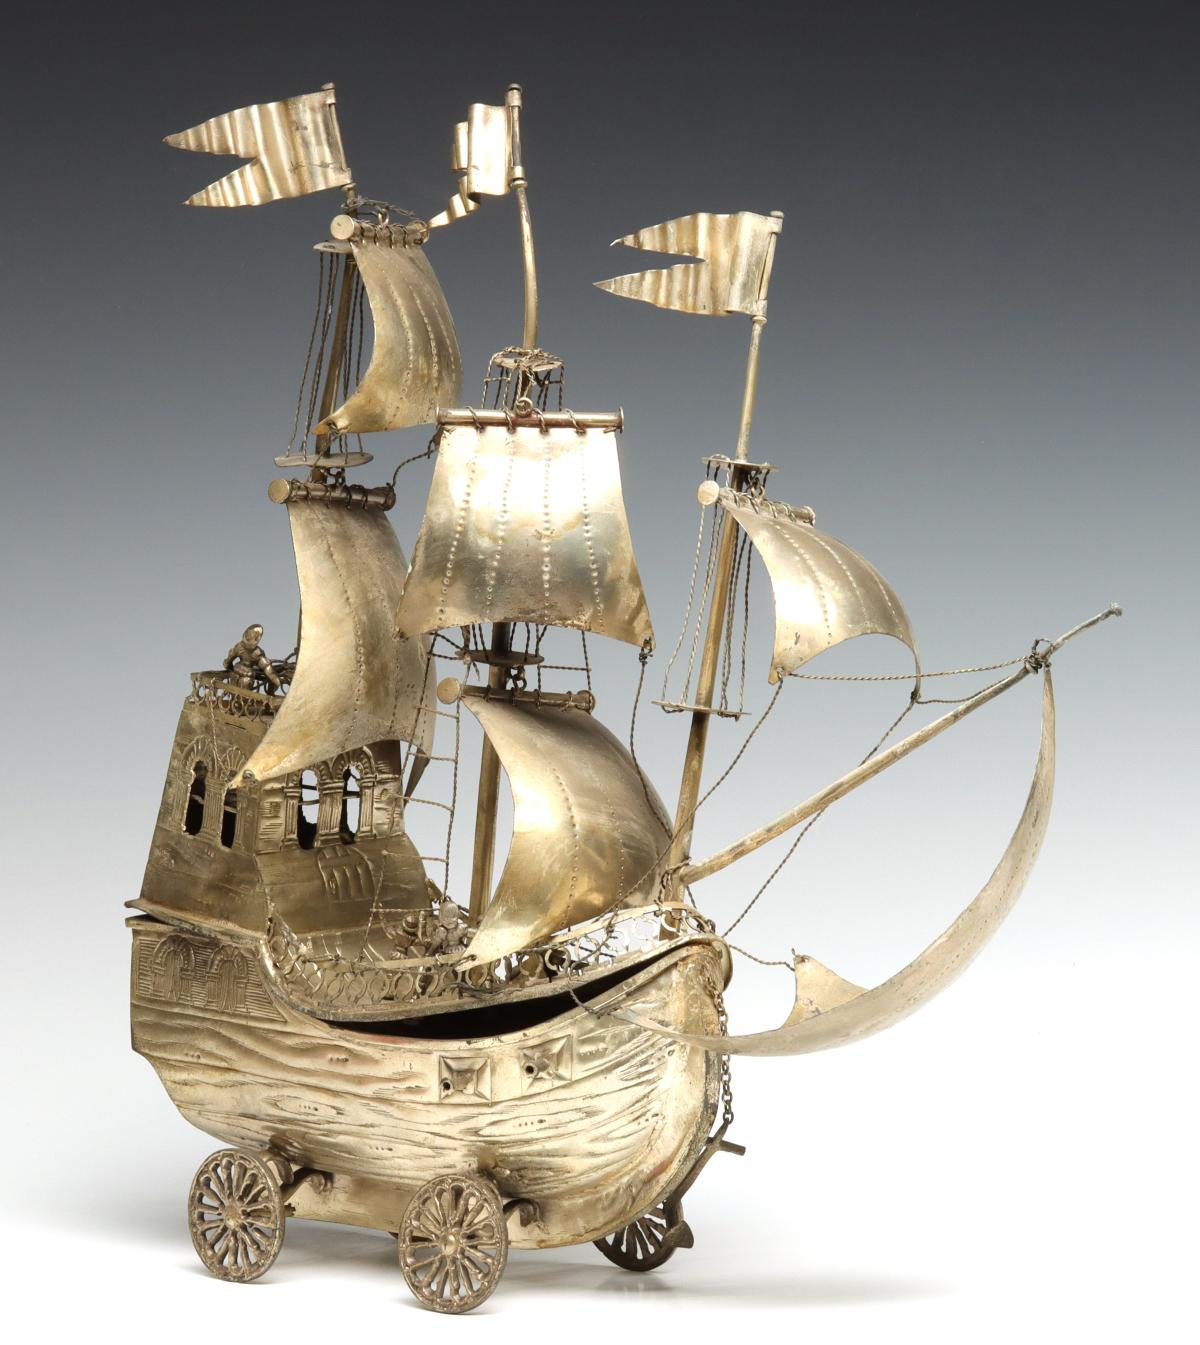 AN EARLY 20TH CENTURY SILVER-PLATED GALLEON NEFF